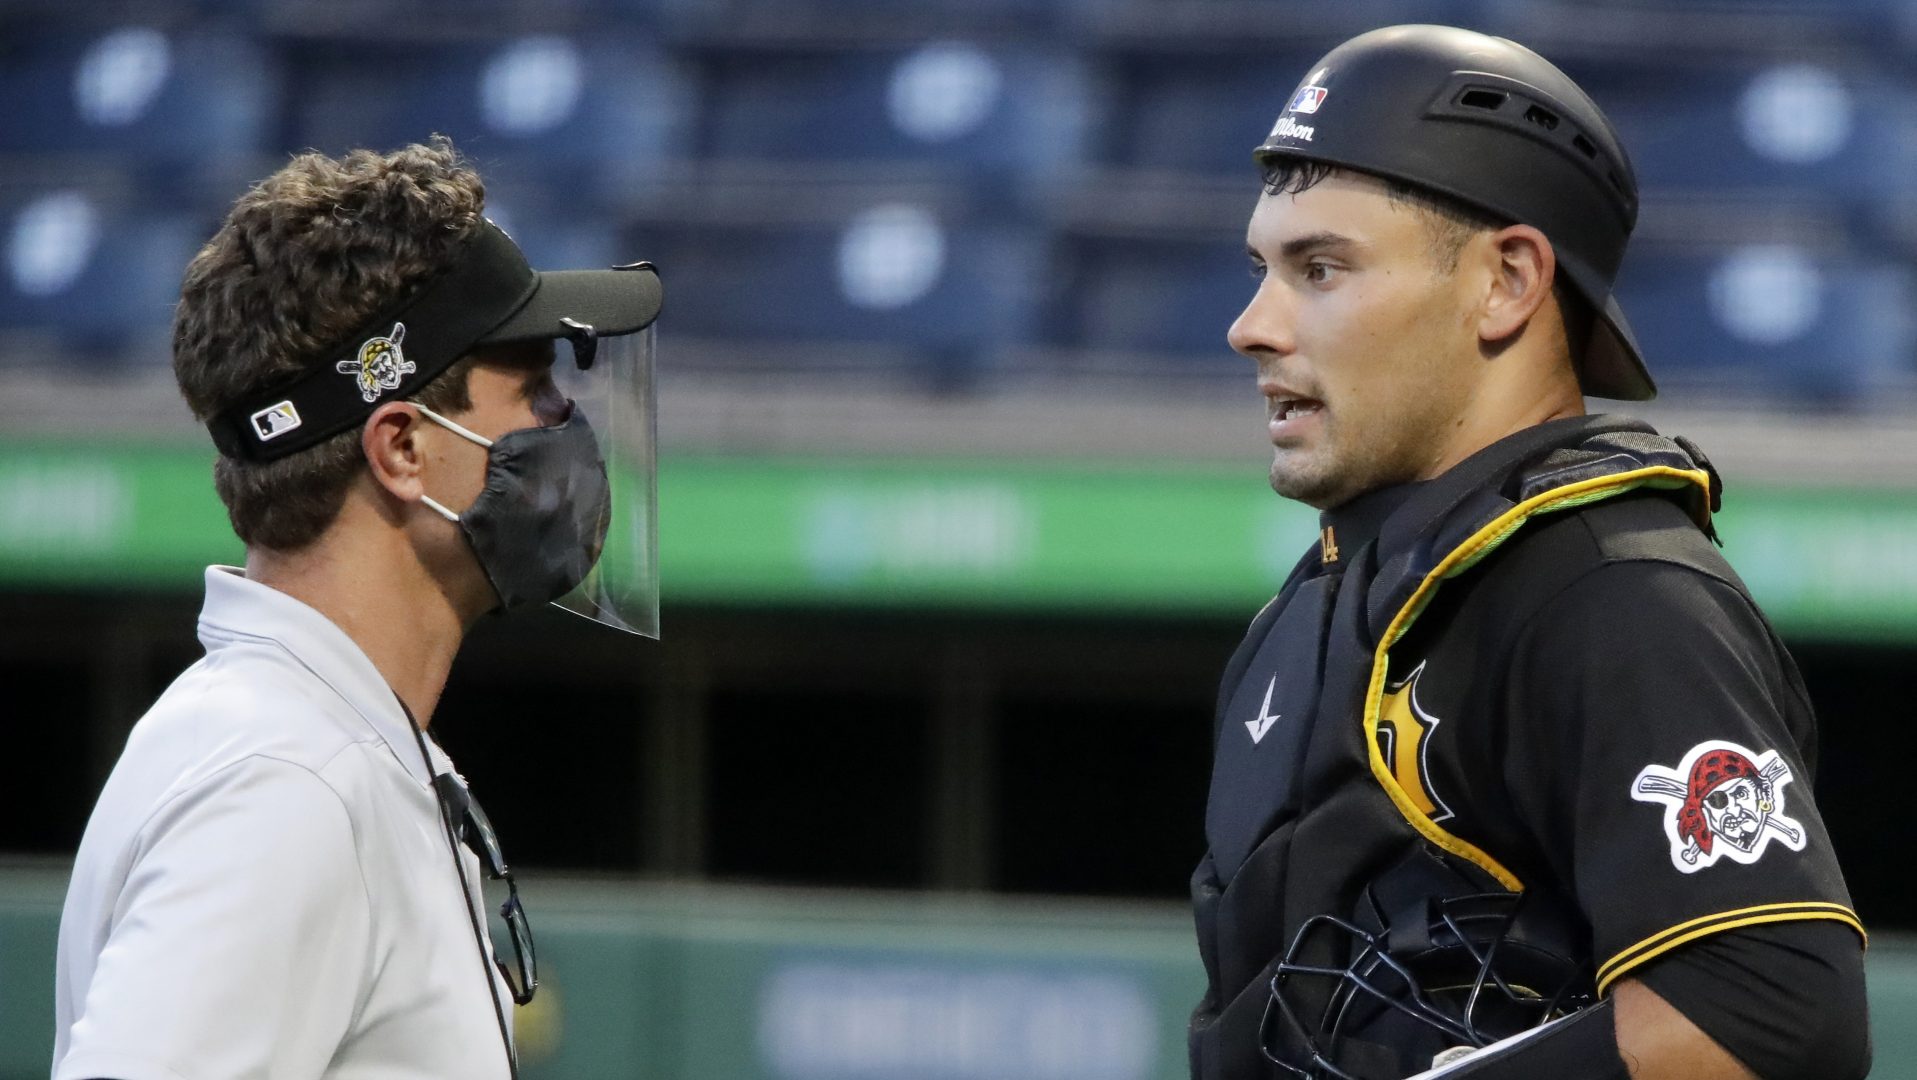 Pittsburgh Pirates catcher Luke Maile, right, talks with a trainer during an intrasquad game during the team's baseball practice at PNC Park in Pittsburgh, Wednesday, July 15, 2020.